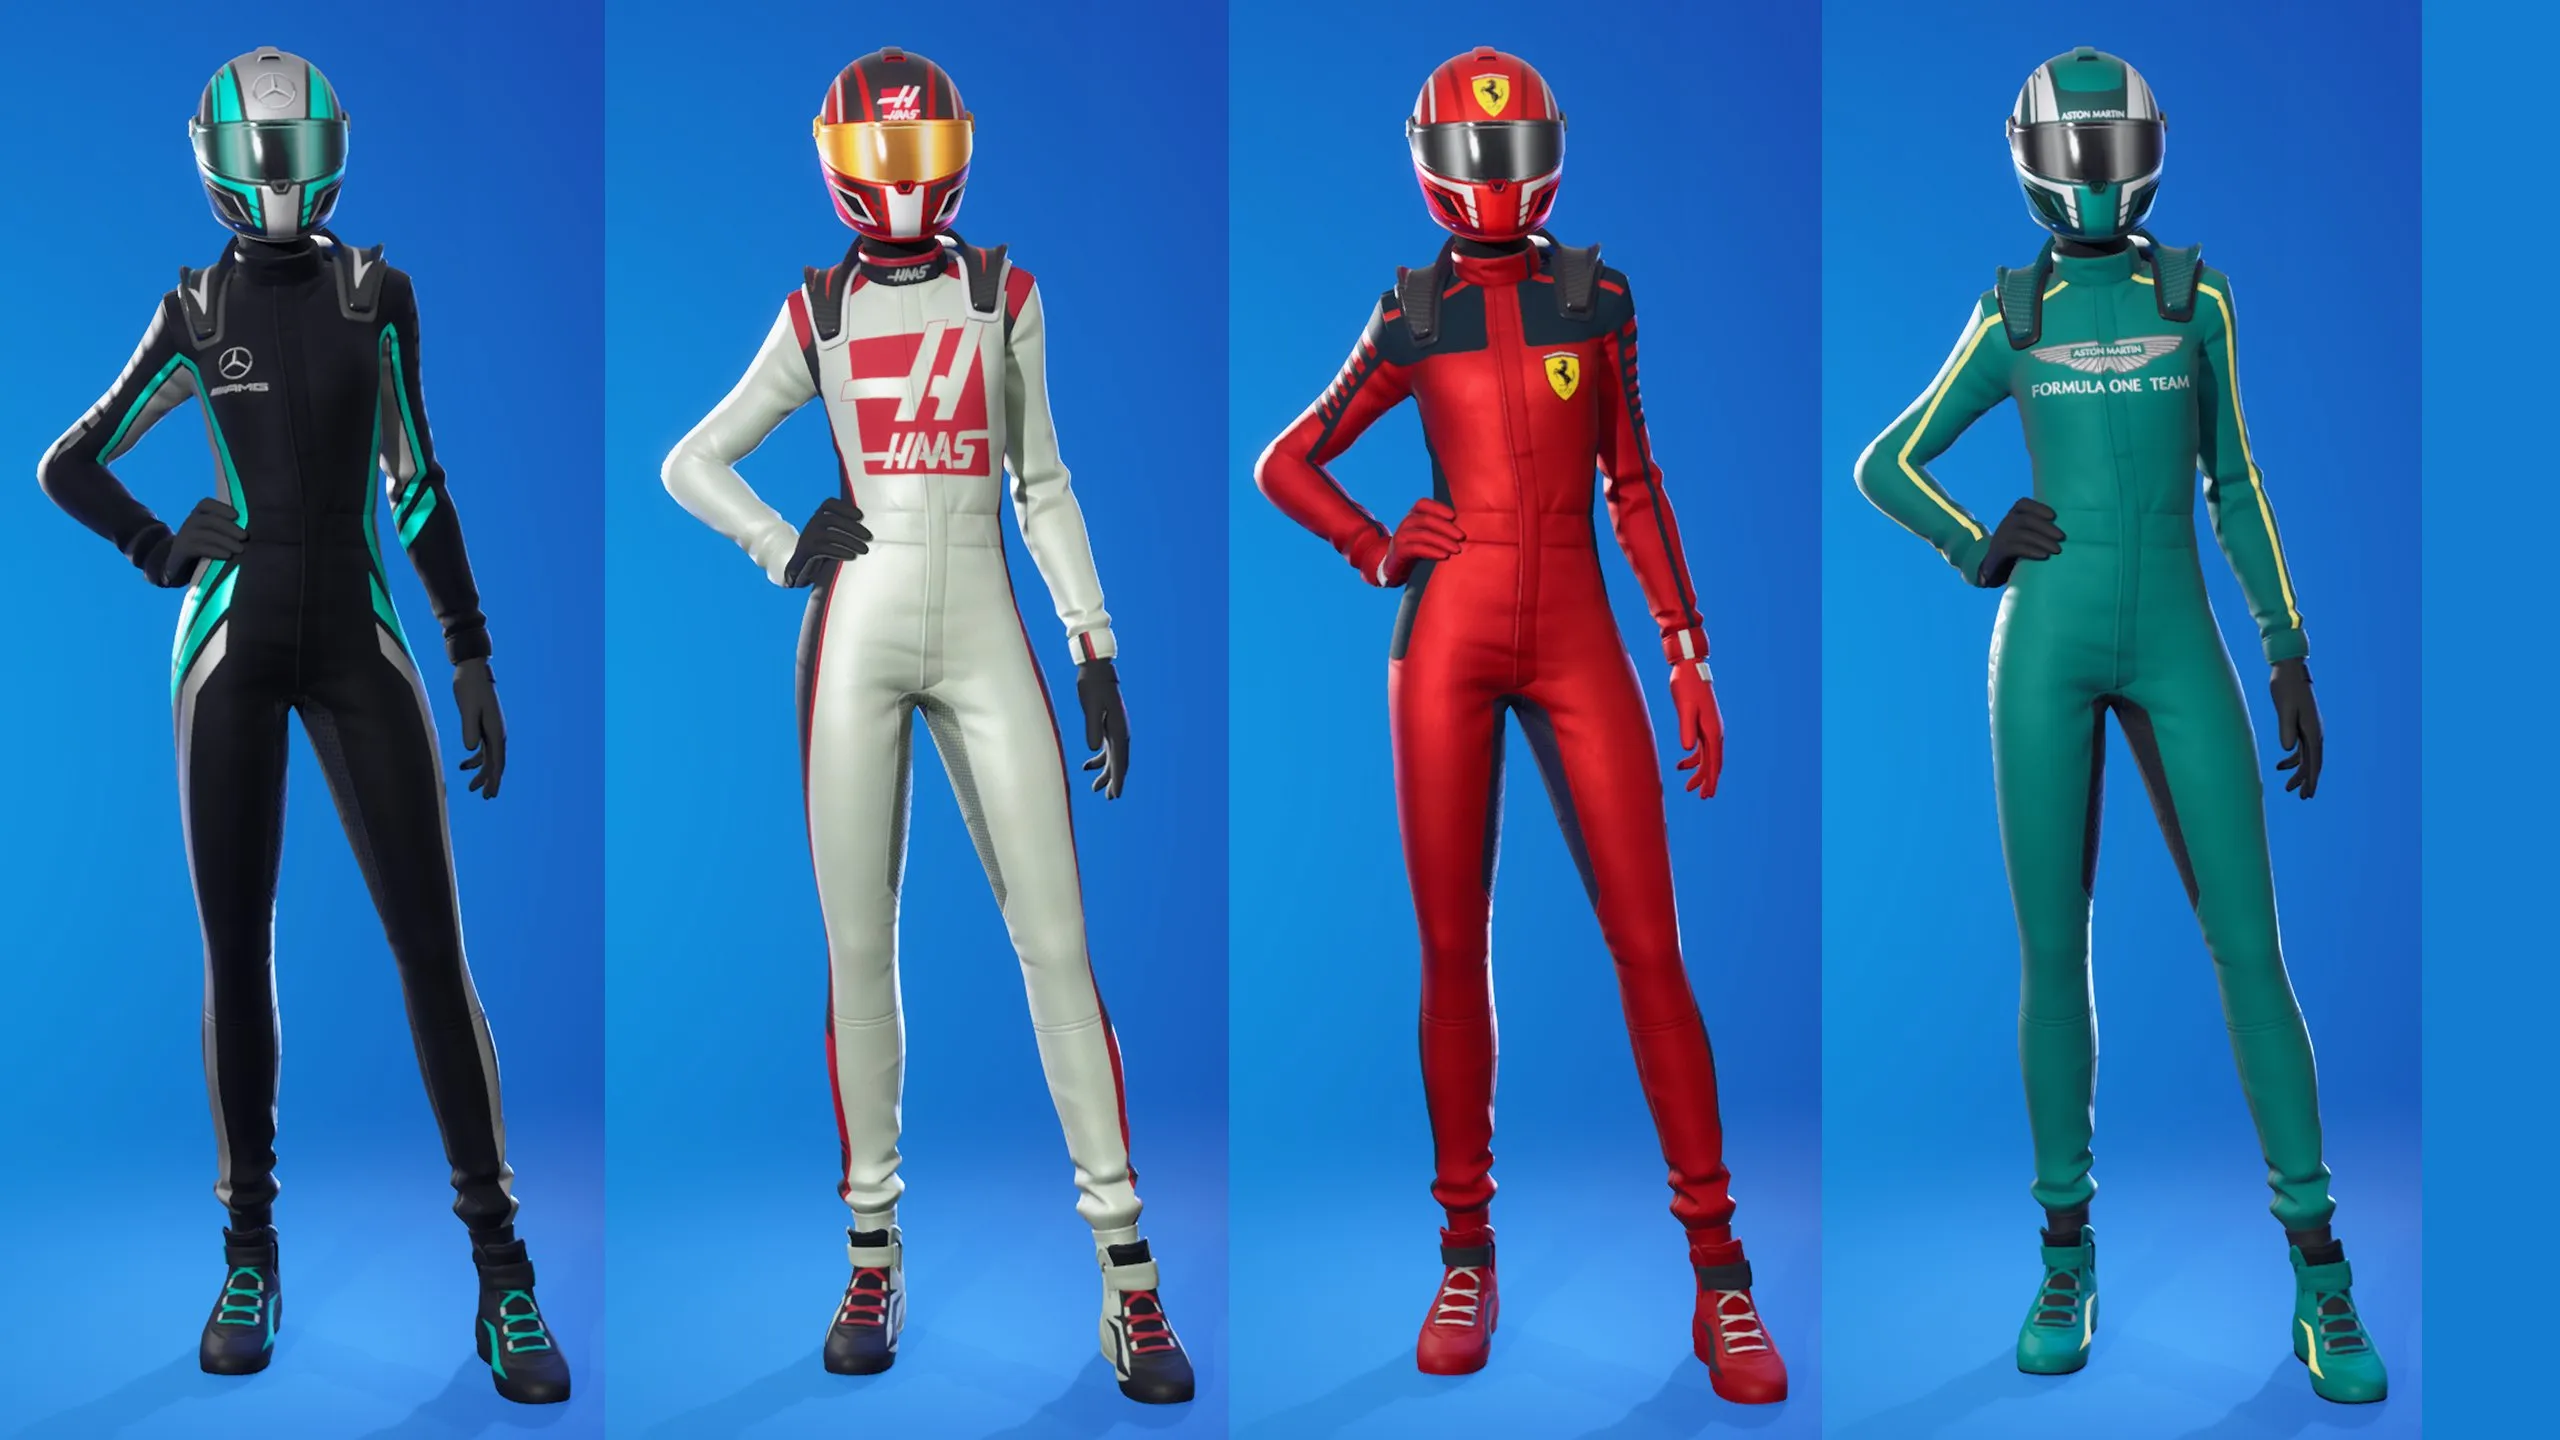 All F1 Racer Styles and Helmet on the "Torque" Outfit.jpeg